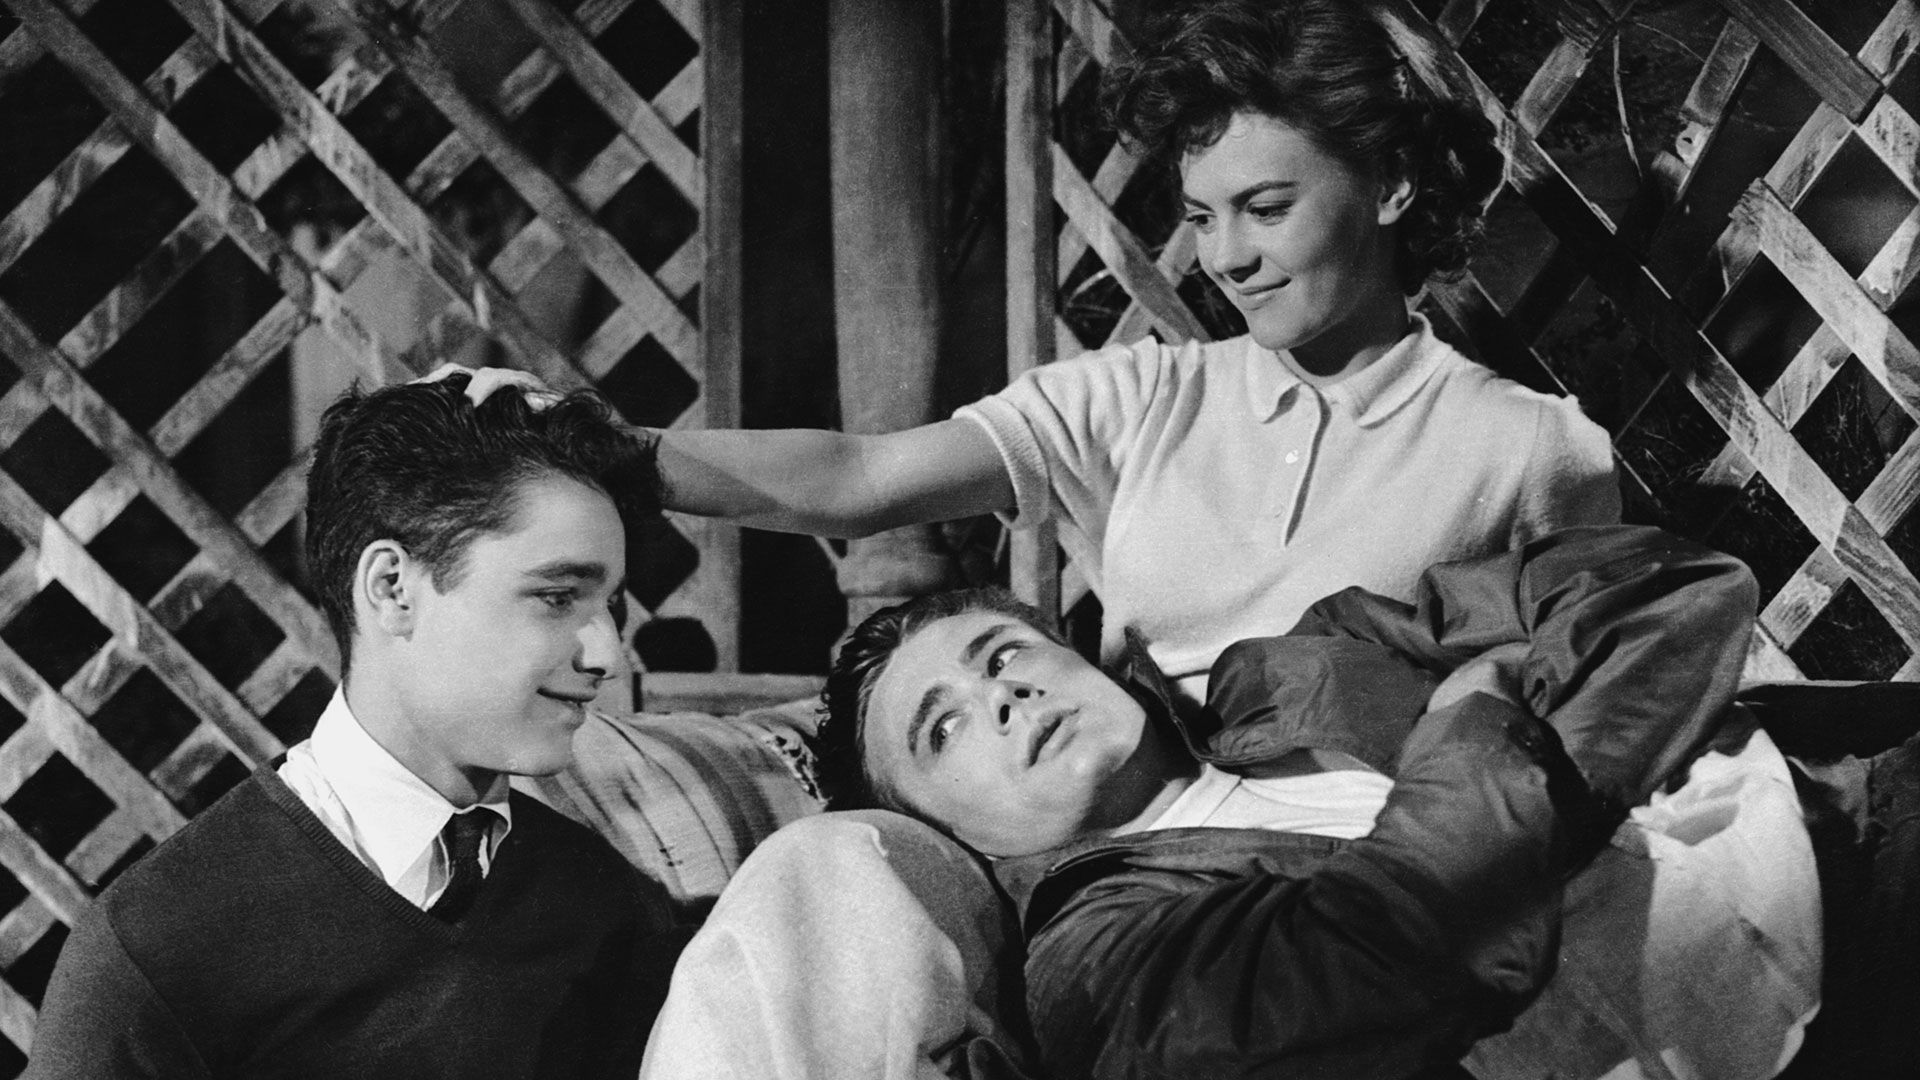 American actors (left to right) Sal Mineo (1939 - 1976), James Dean (1931 - 1955) and Natalie Wood (1938 - 1981) in a scene from the film 'Rebel Without a Cause', directed by Nicholas Ray, 1955.  (Photo via John Kobal Foundation/Hulton Archive/Getty Images)